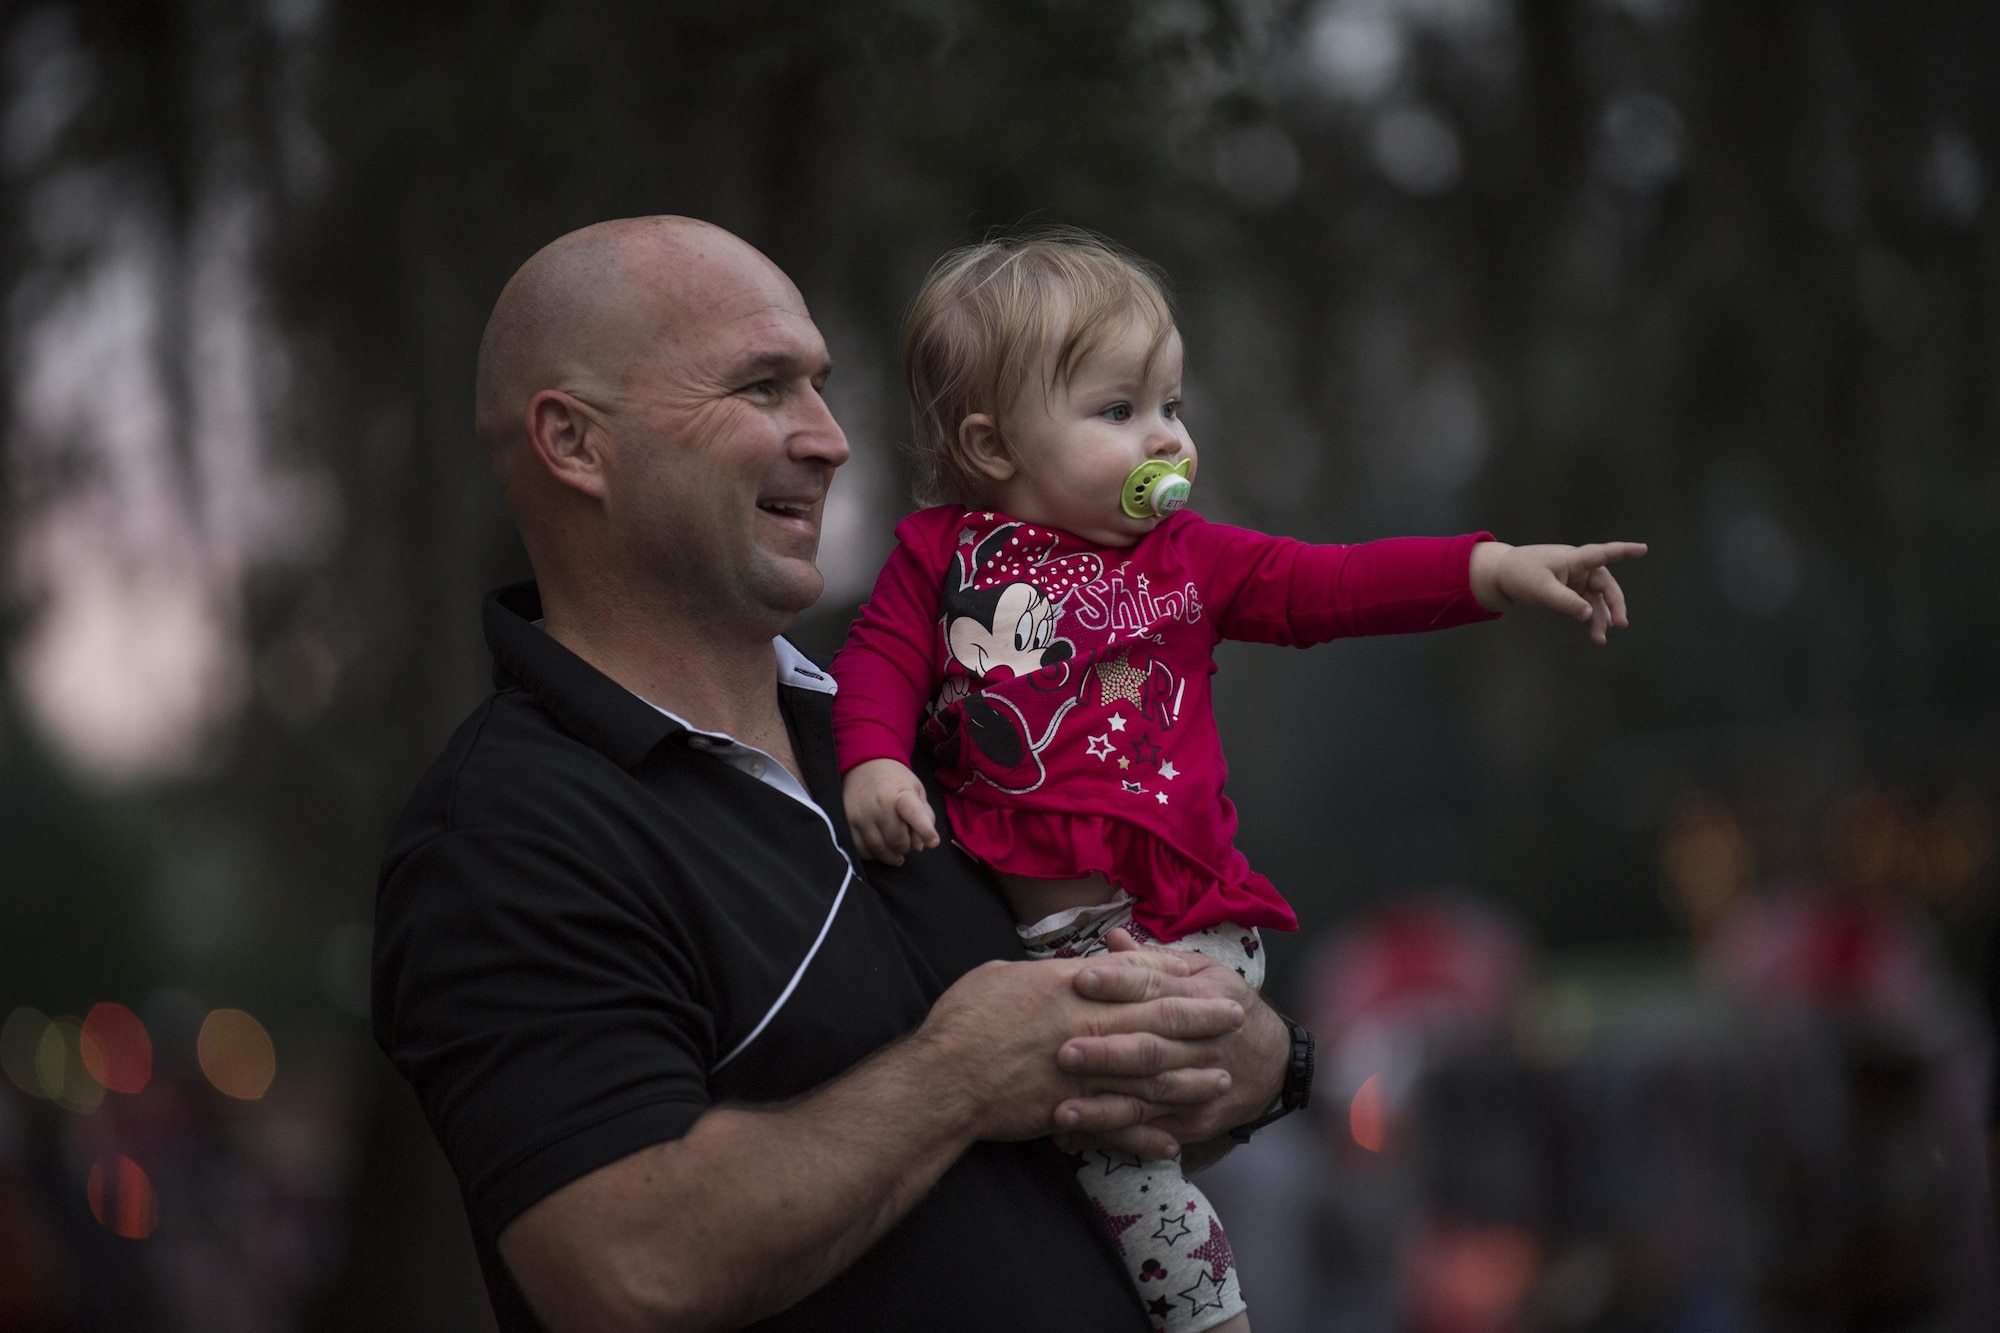 Senior Master Sgt. Matt Jenkins, 23d Maintenance Group weapons standardization section superintendent, watches the parade with daughter Etta, Dec. 1, 2017, at Moody Air Force Base, Ga. The annual event brings the base community together as a way to show thanks for their continuous sacrifice and celebrate the holiday season. The celebration included a parade, raffle give-a-ways, children’s activities and traditional lighting of the base Christmas tree by families of deployed Airmen. (U.S. Air Force photo by Andrea Jenkins)